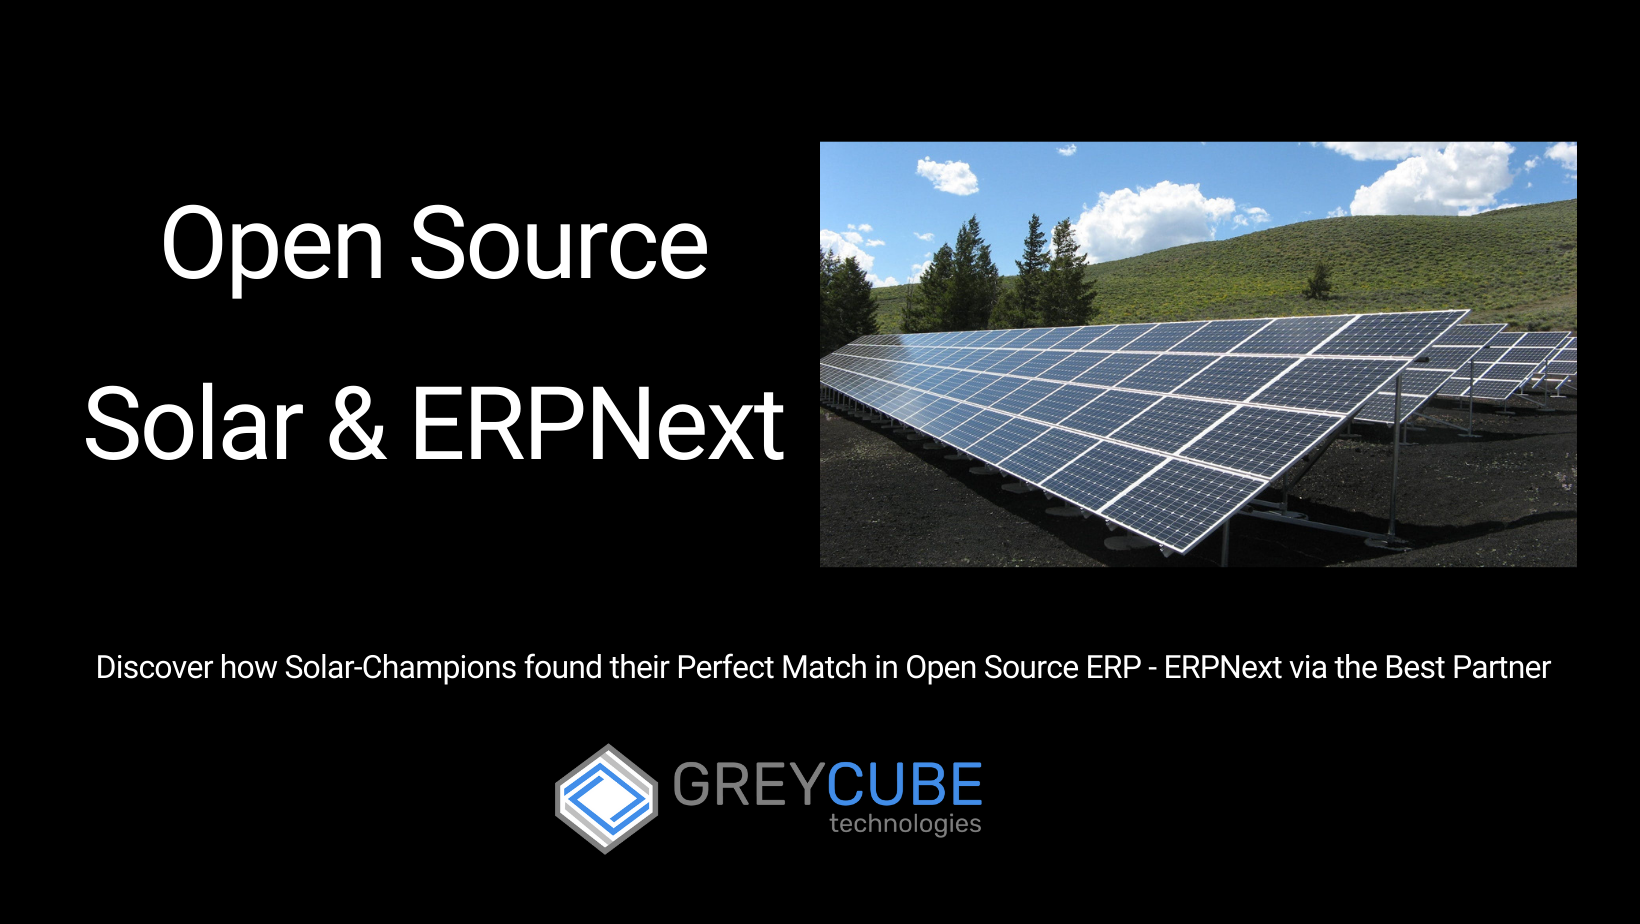 Harnessing the Power of the Sun: How Open Source ERPNext Revolutionized the Solar Industry - Cover Image